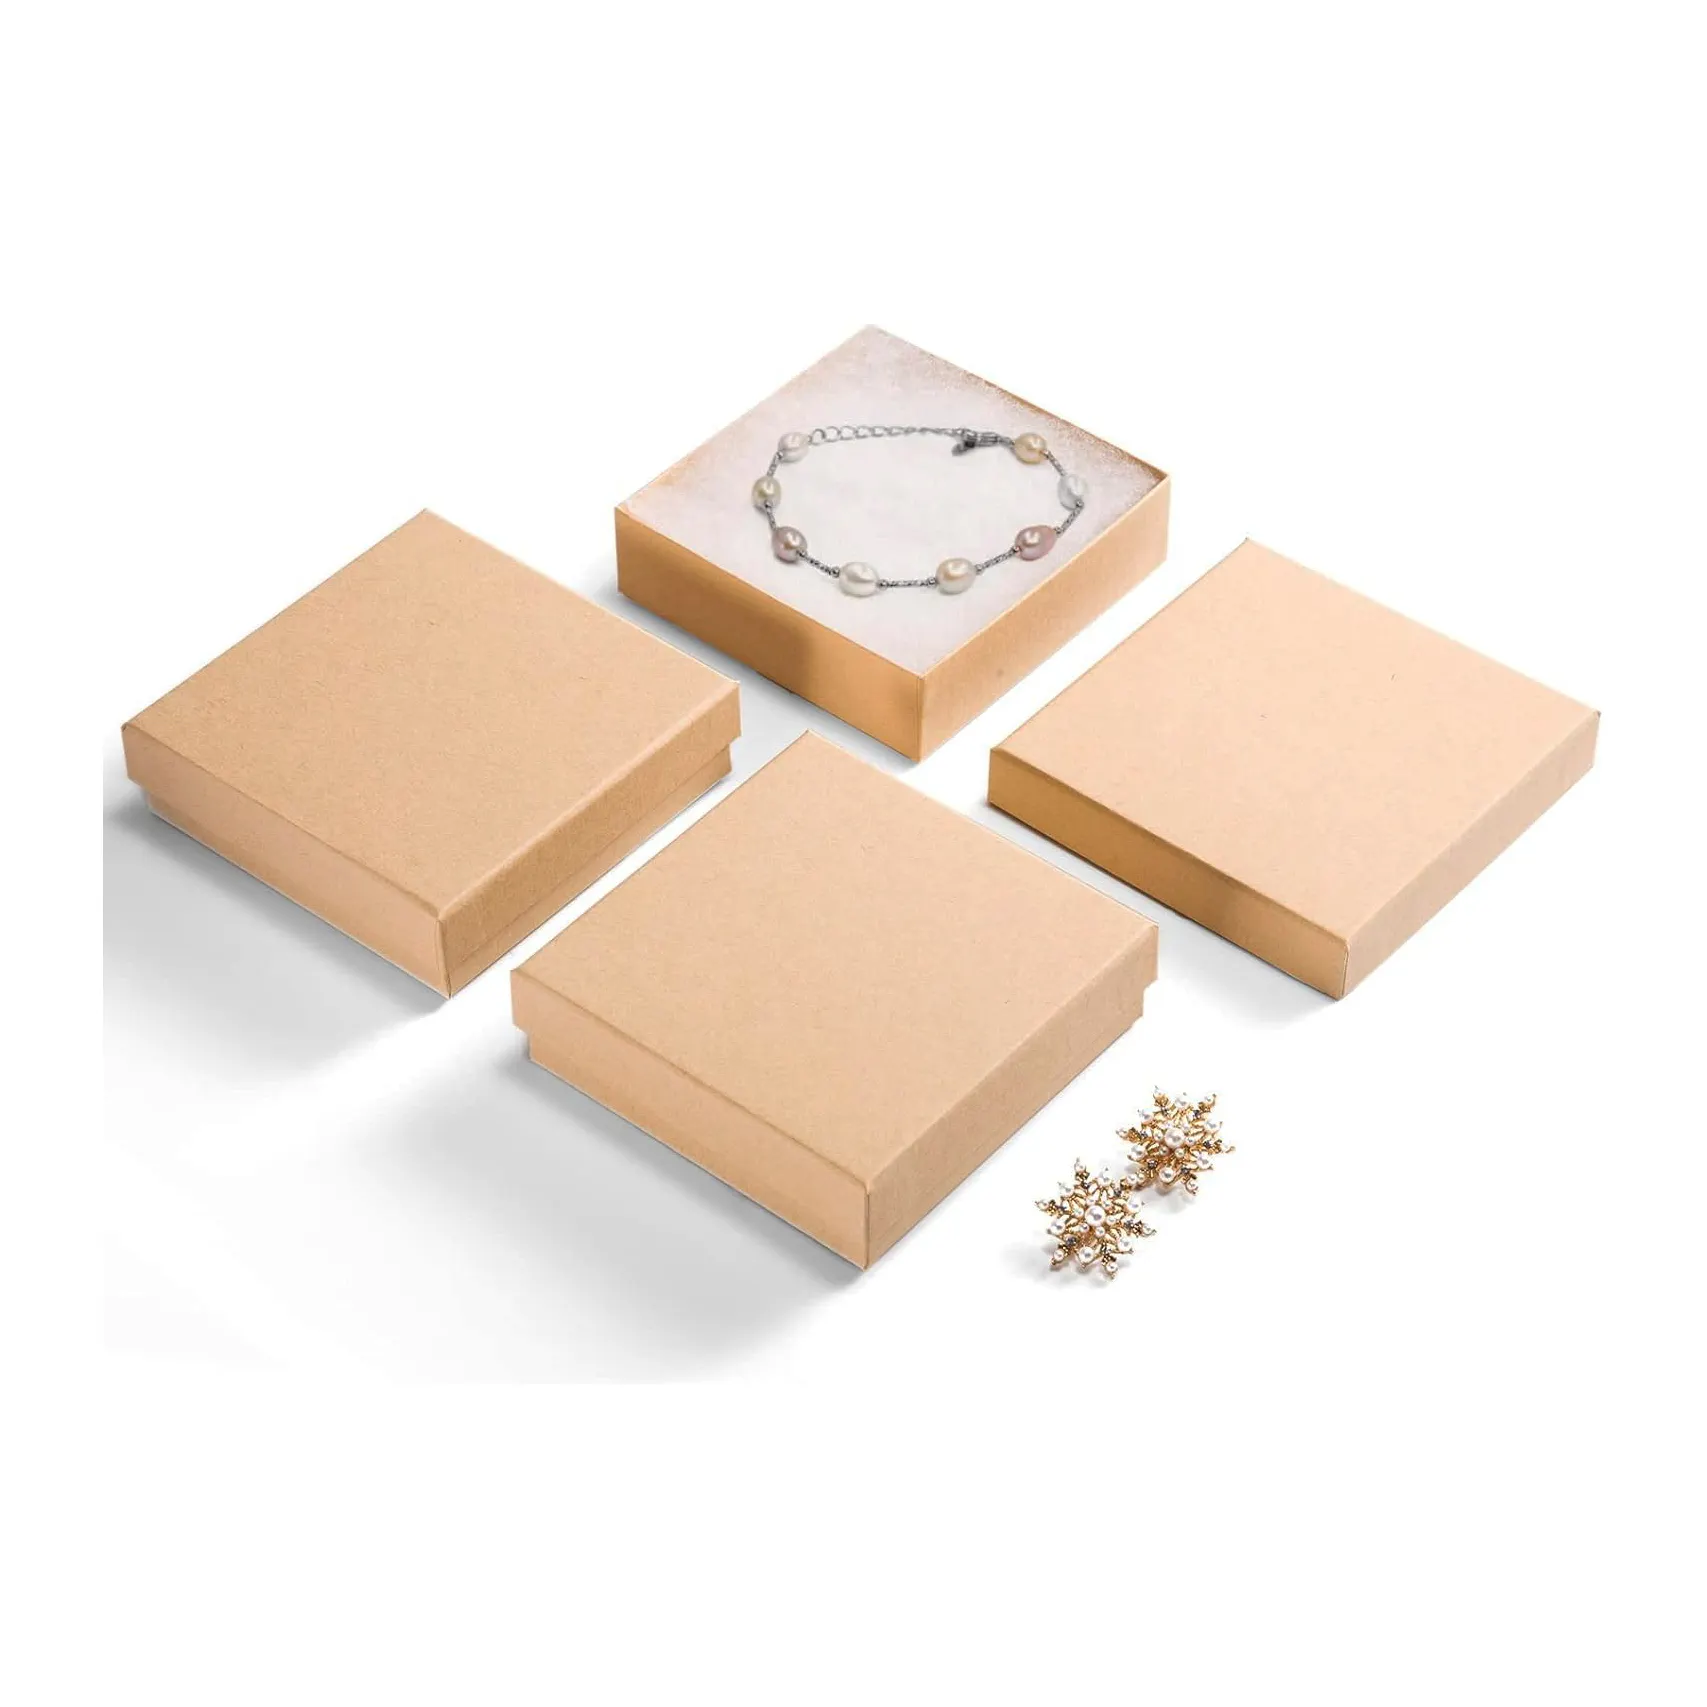 Cardboard eco packaging small Size custom display Propose Occasion Valentine's Day gifts Jewelry bracelet Necklace gift box